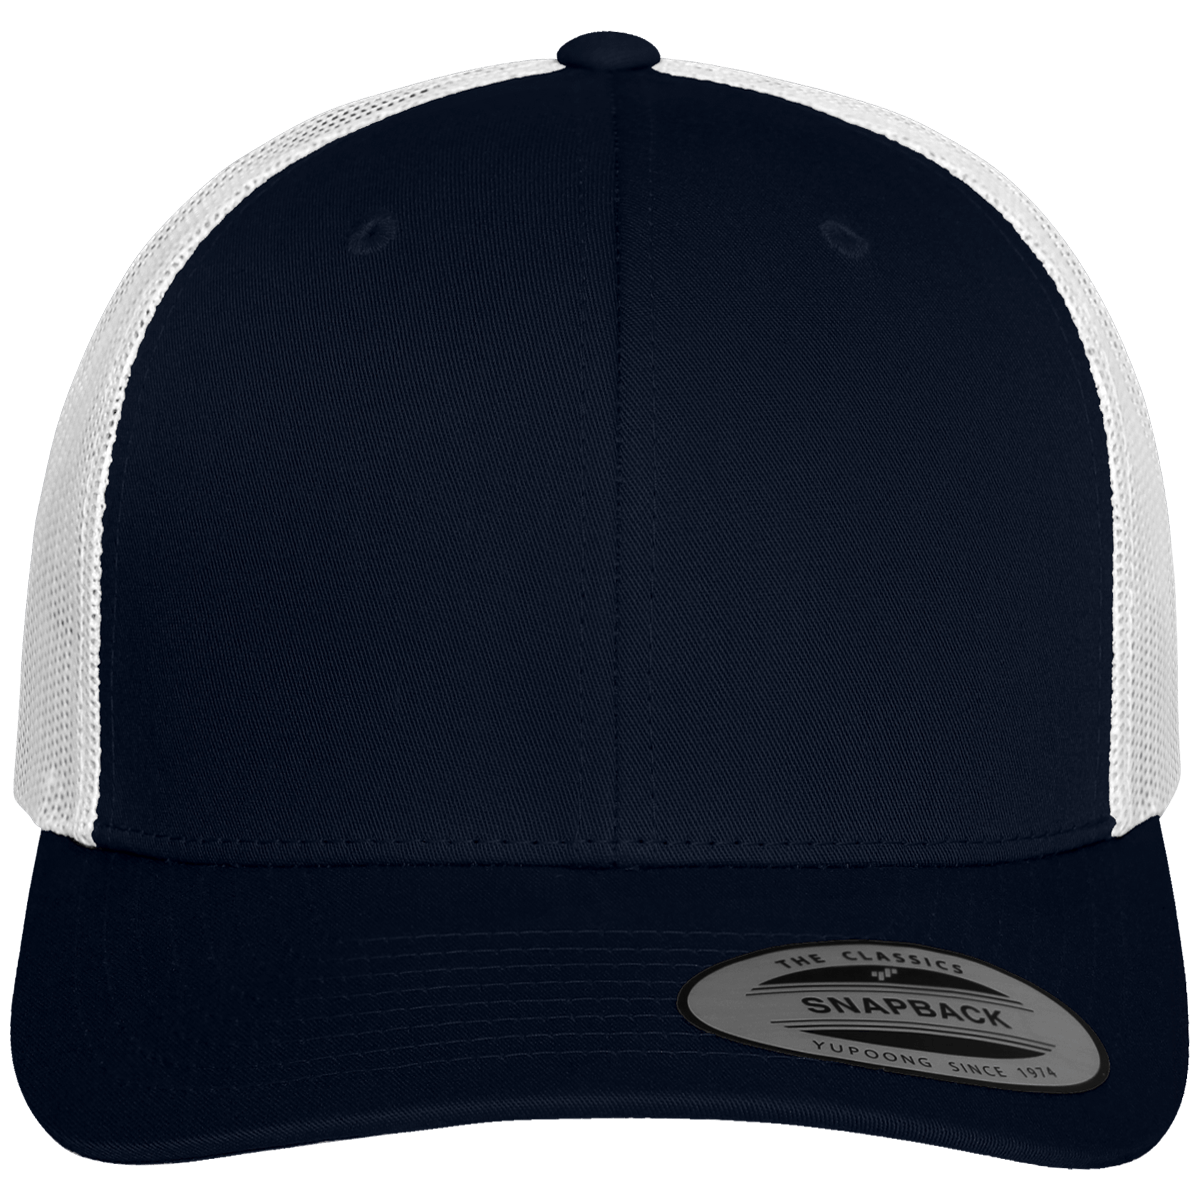 Customizable Vintage Cap With Embroidery Navy / White